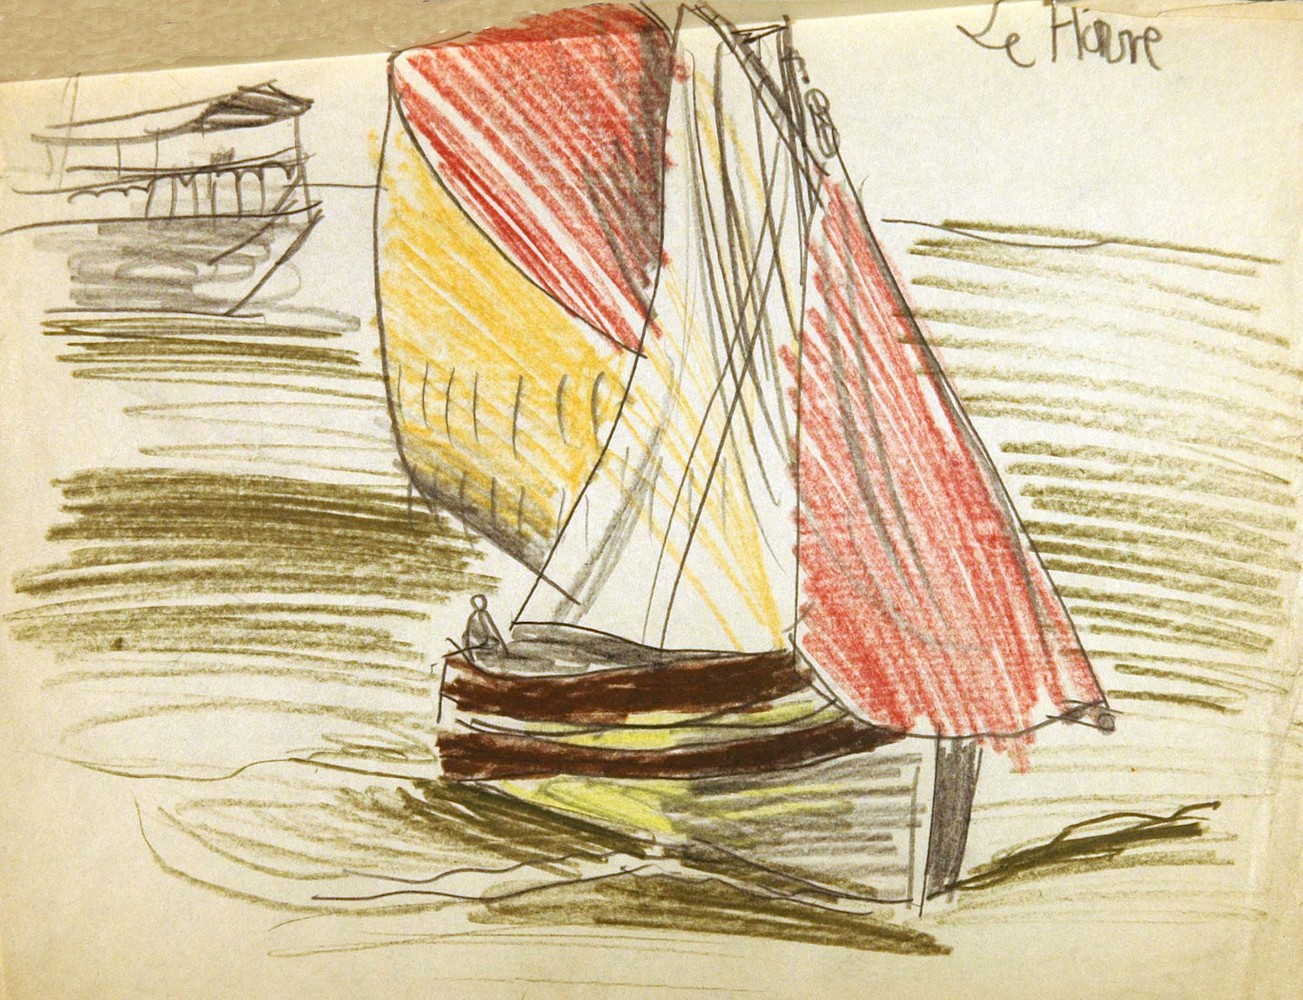 French Sketches. Le Havre I